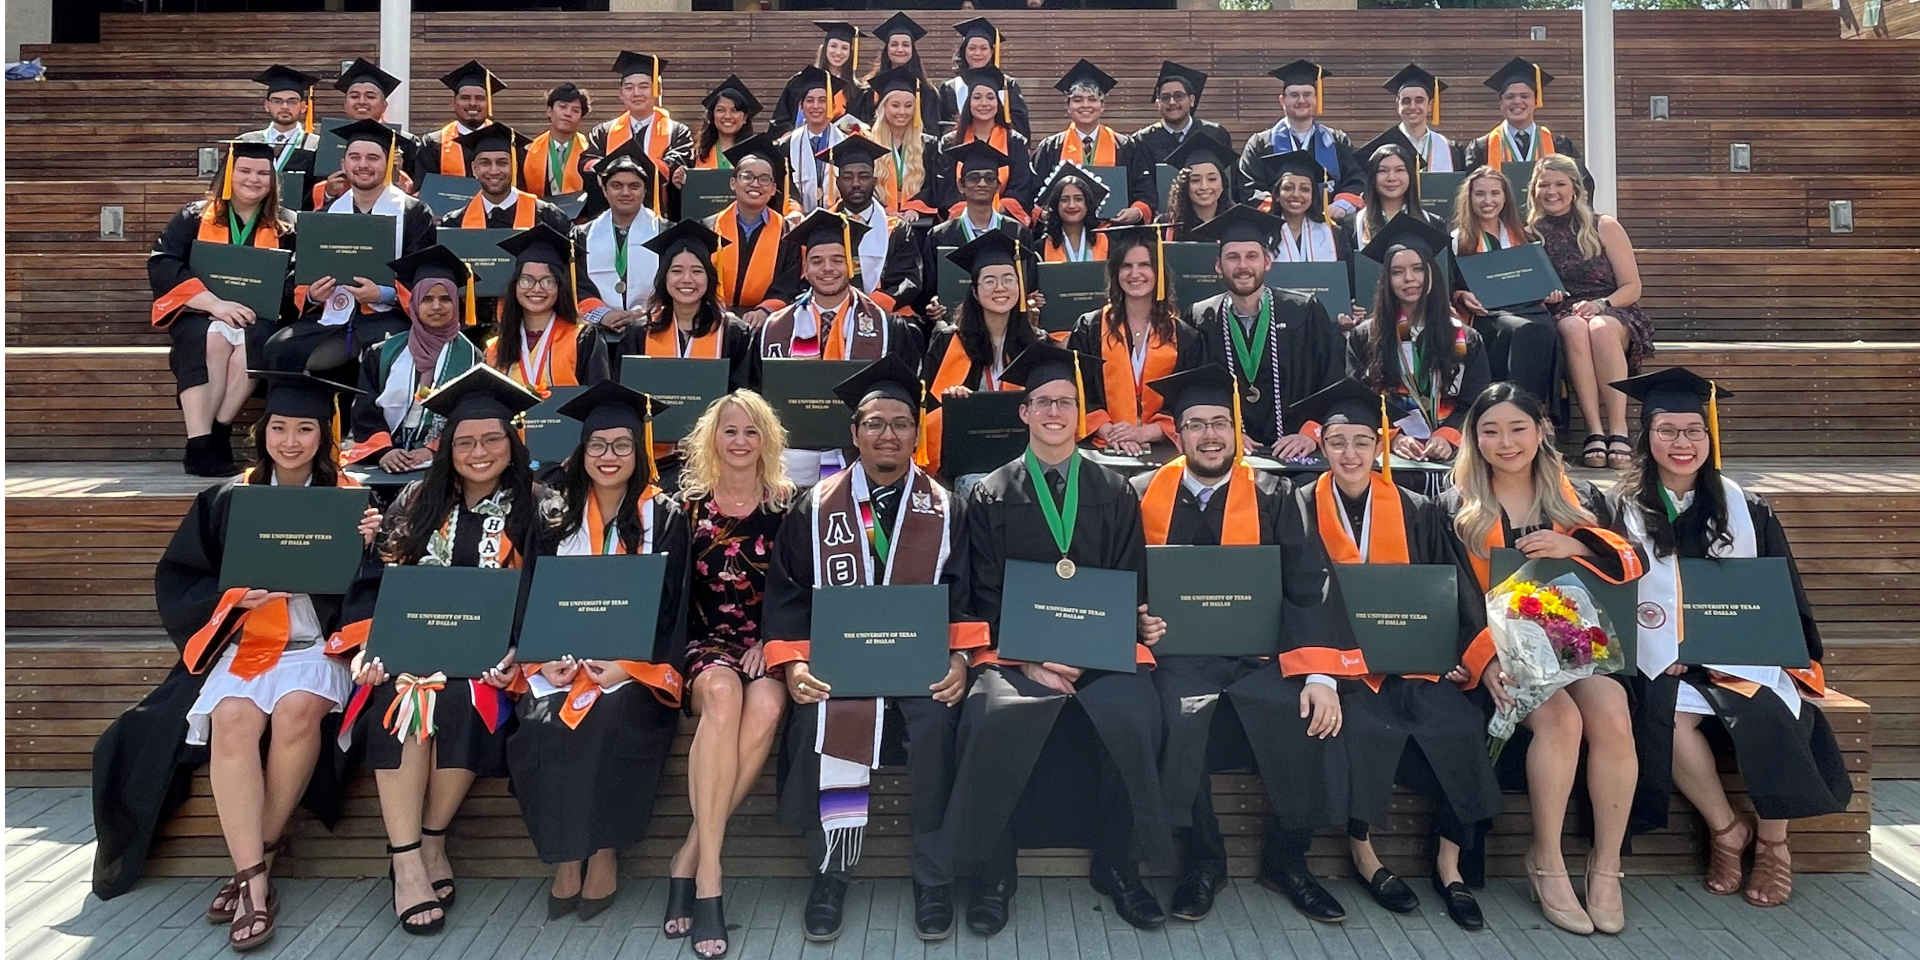 New alumni from the Professional Program in Accounting gather after the ceremony to celebrate on the mall. The program prepares students to pass the CPA exam and helps them secure public accounting internships and full-time jobs upon graduation.